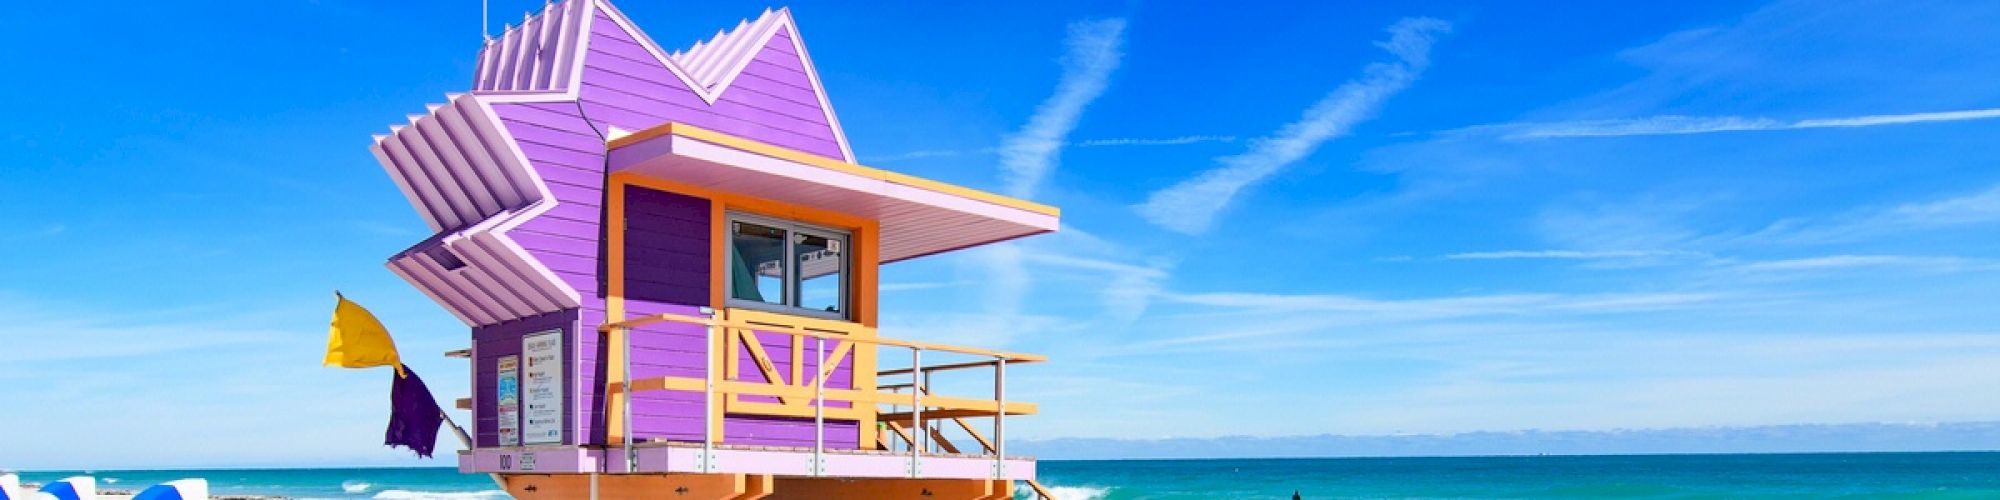 A vibrant purple lifeguard tower stands on a sandy beach against a clear blue sky, with the ocean waves gently hitting the shore in the background.